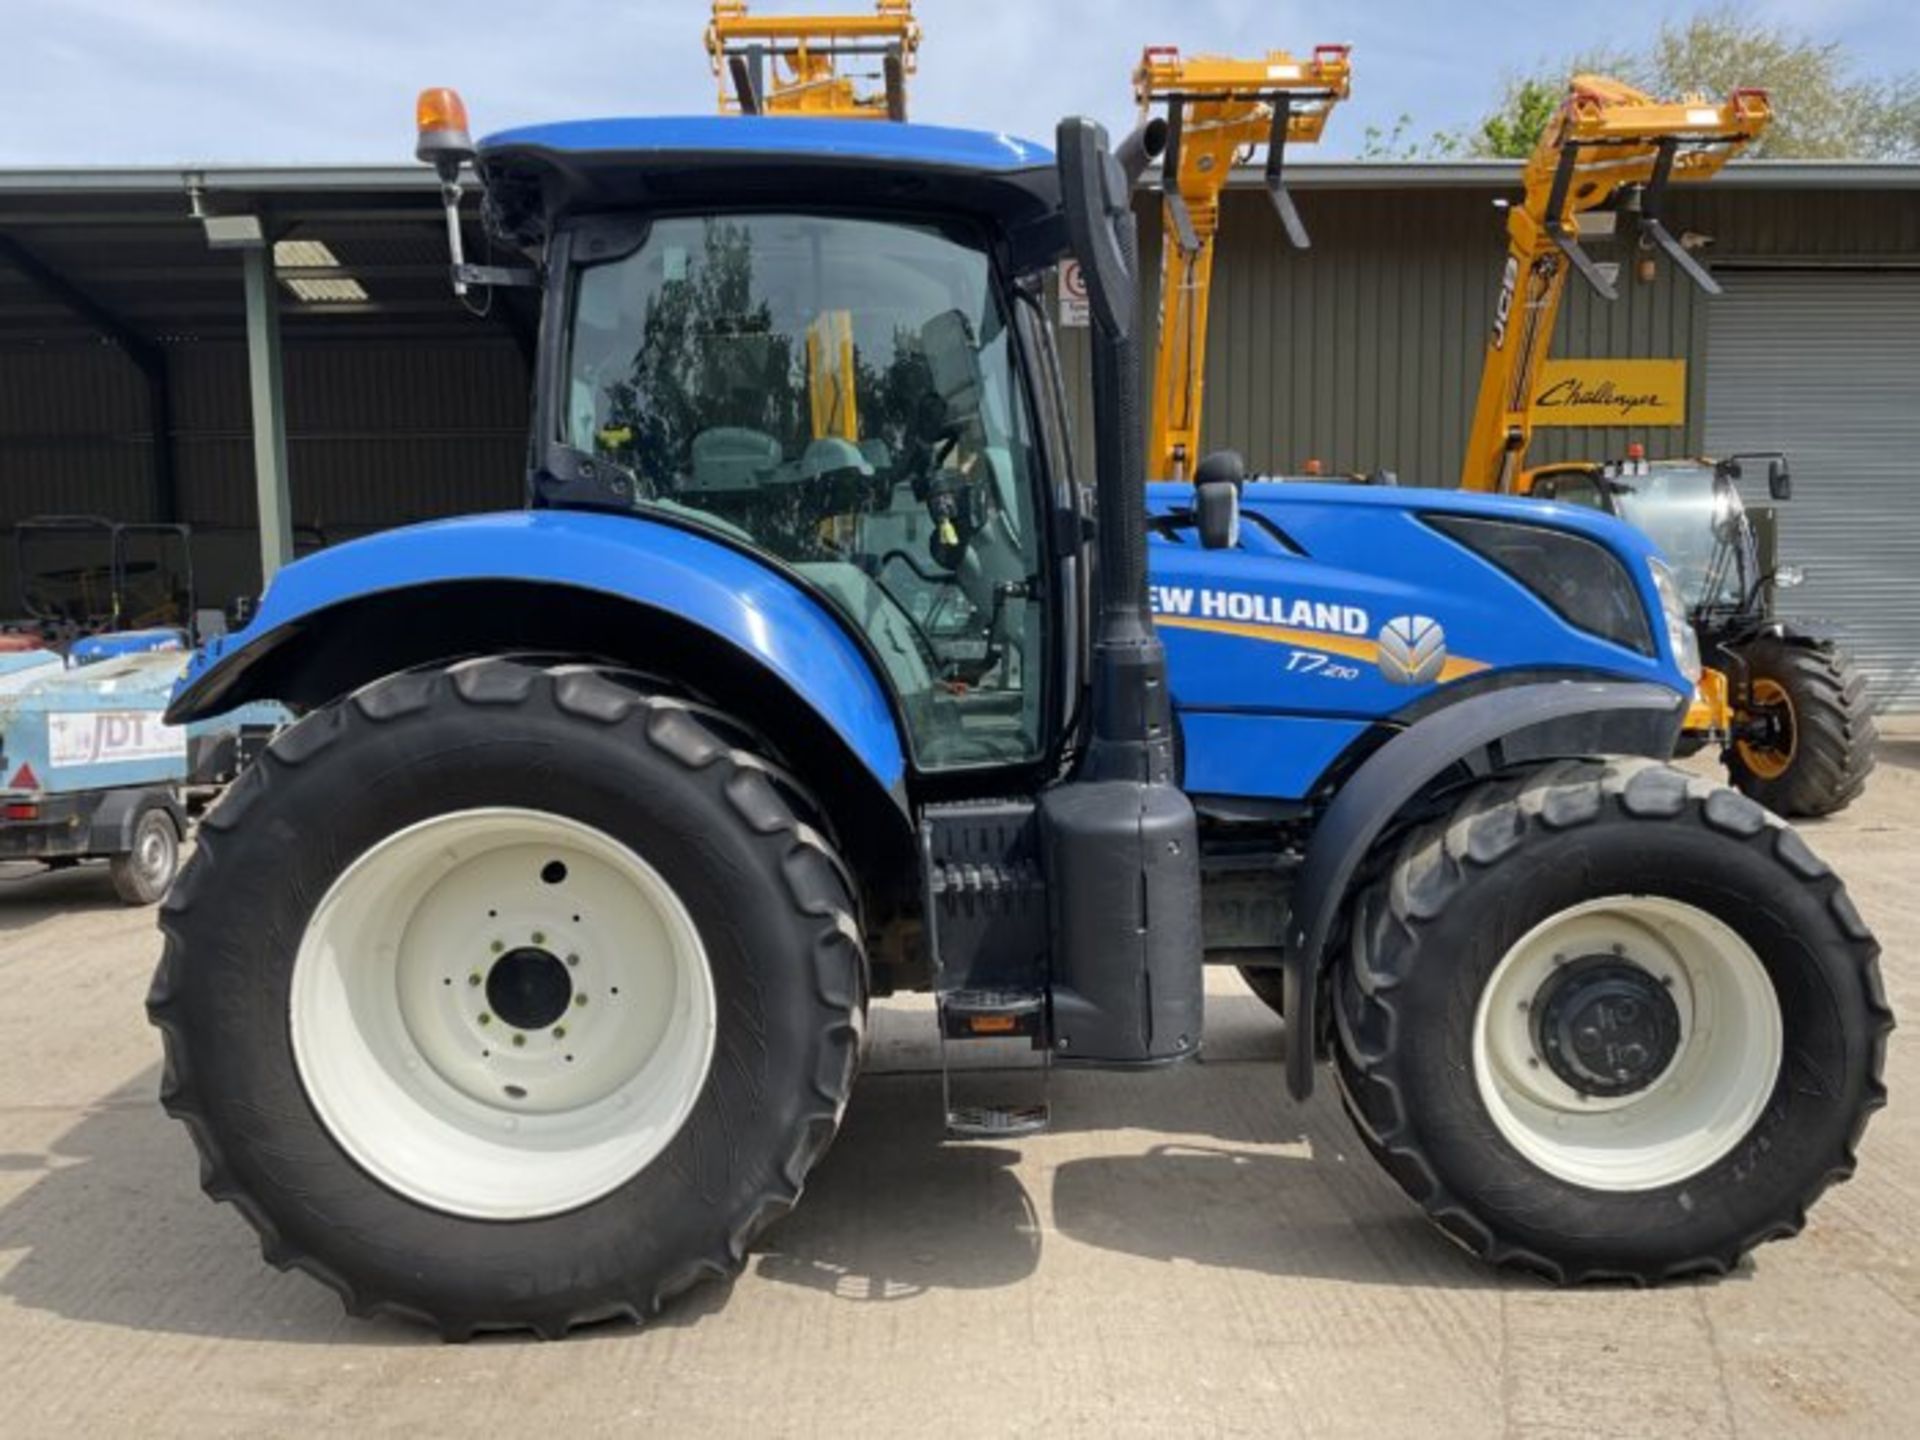 NEW HOLLAND T7.210 4033 HOURS. 2020 – 20 REG. - Image 8 of 11